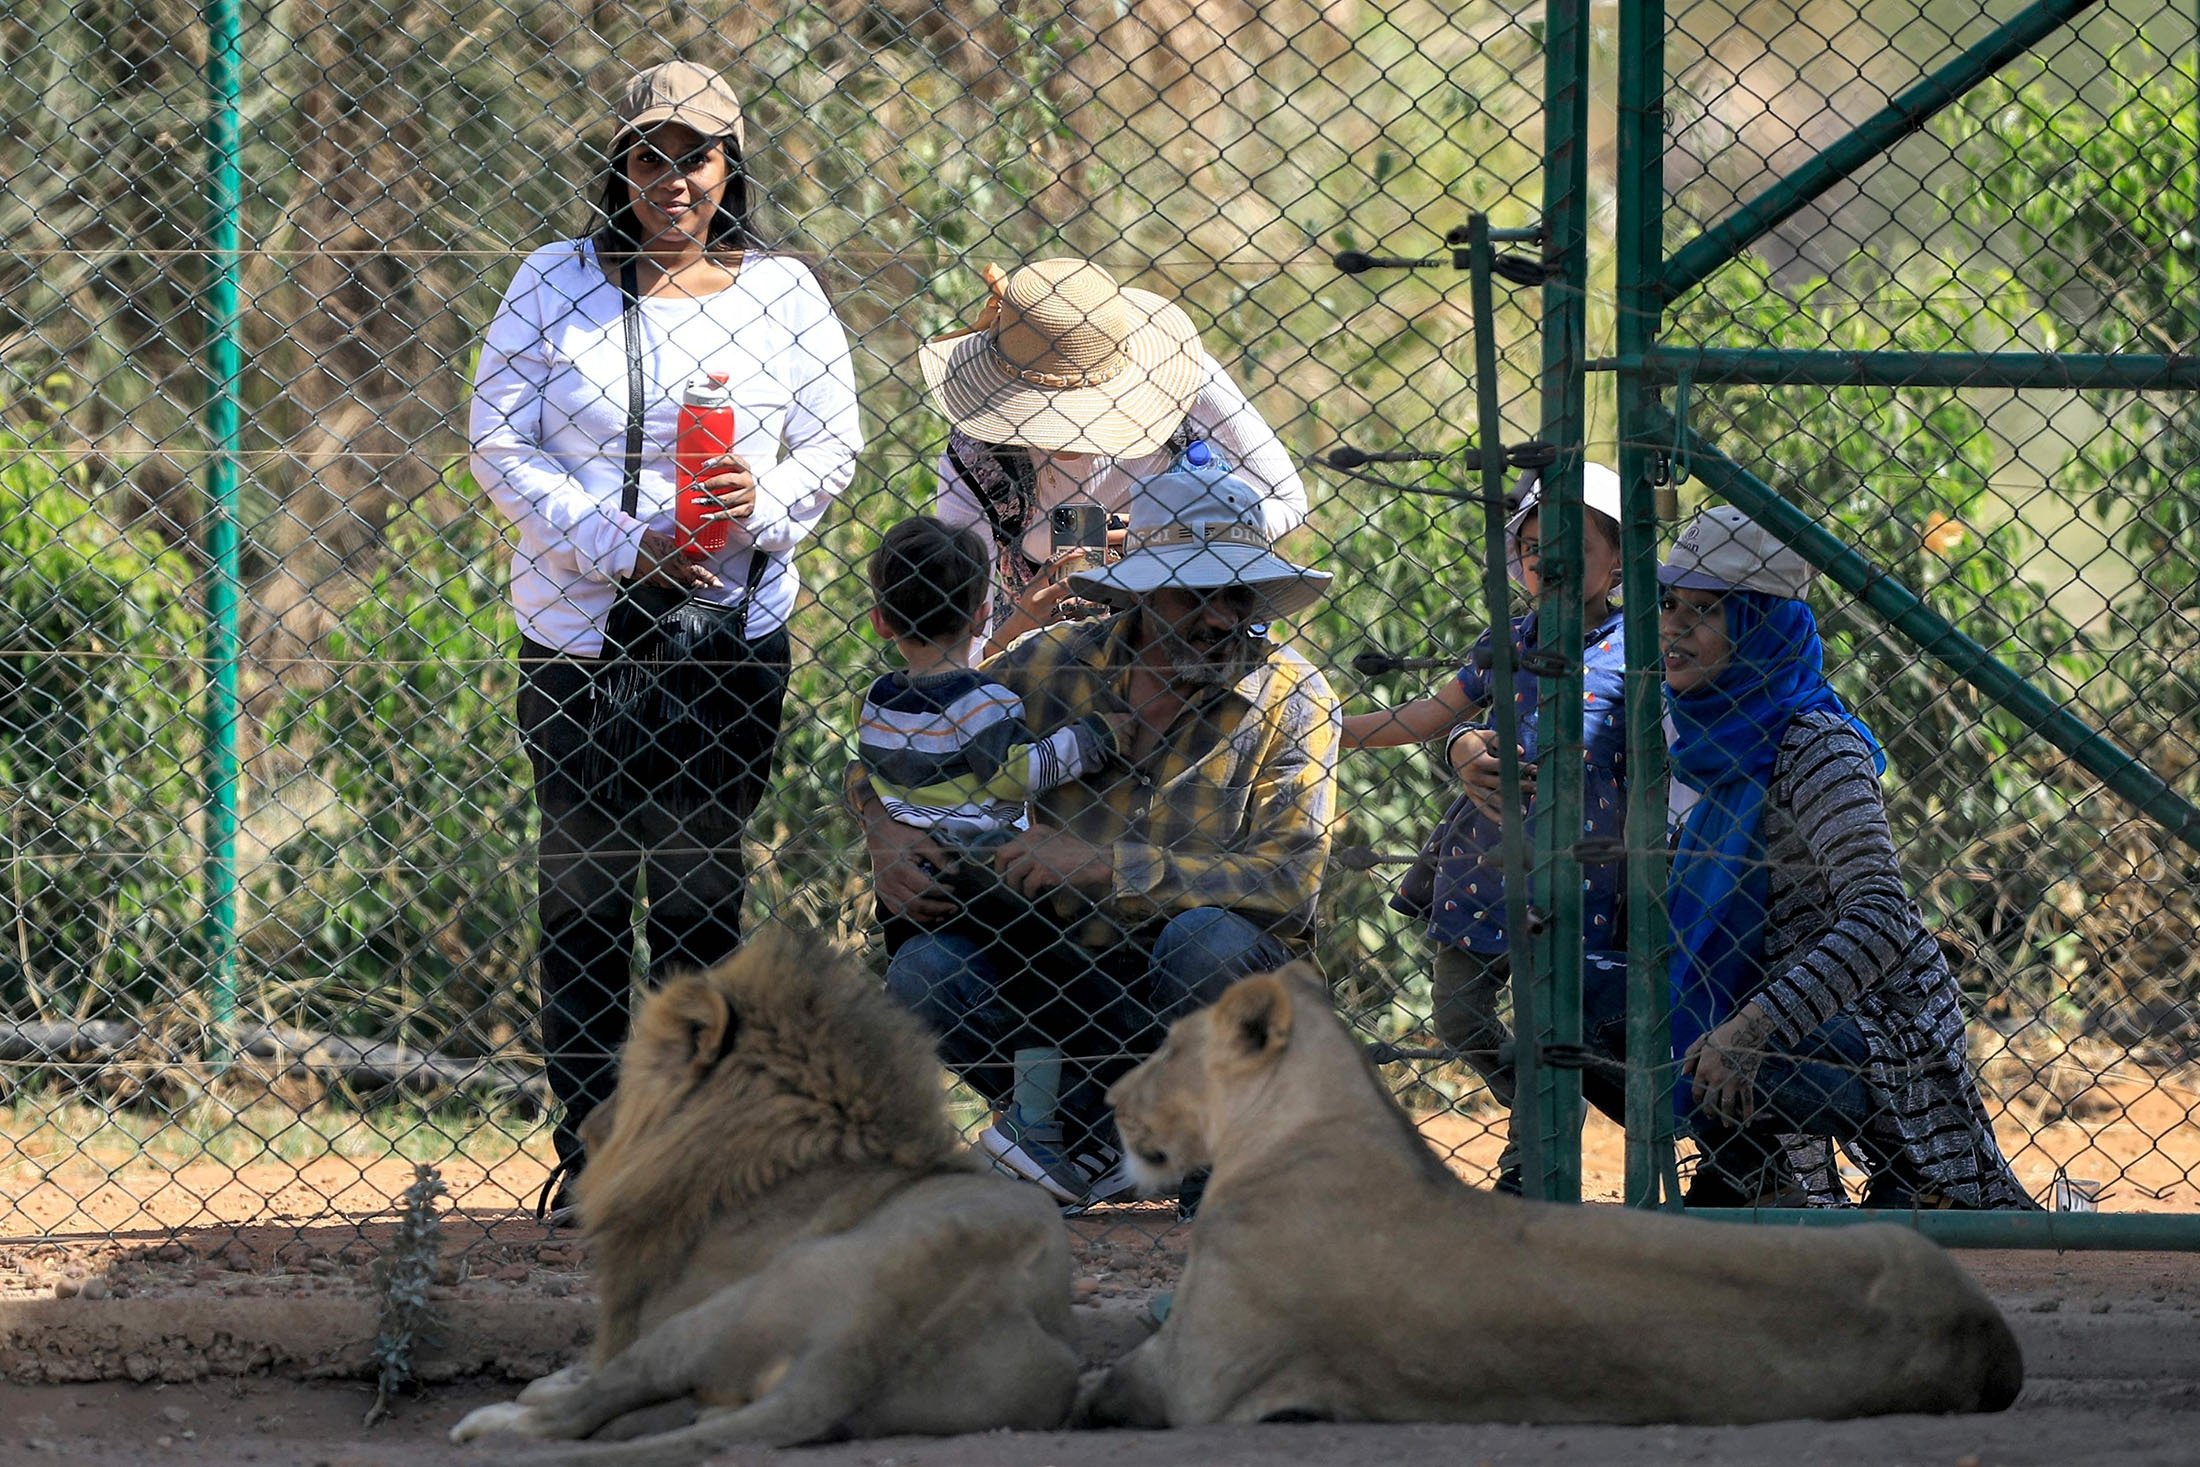 Visitors sit behind the fence of a lion enclosure at the Sudan Animal Rescue center in al-Bageir, south of the capital Khartoum, Sudan, Feb.  28, 2022. (AFP Photo)